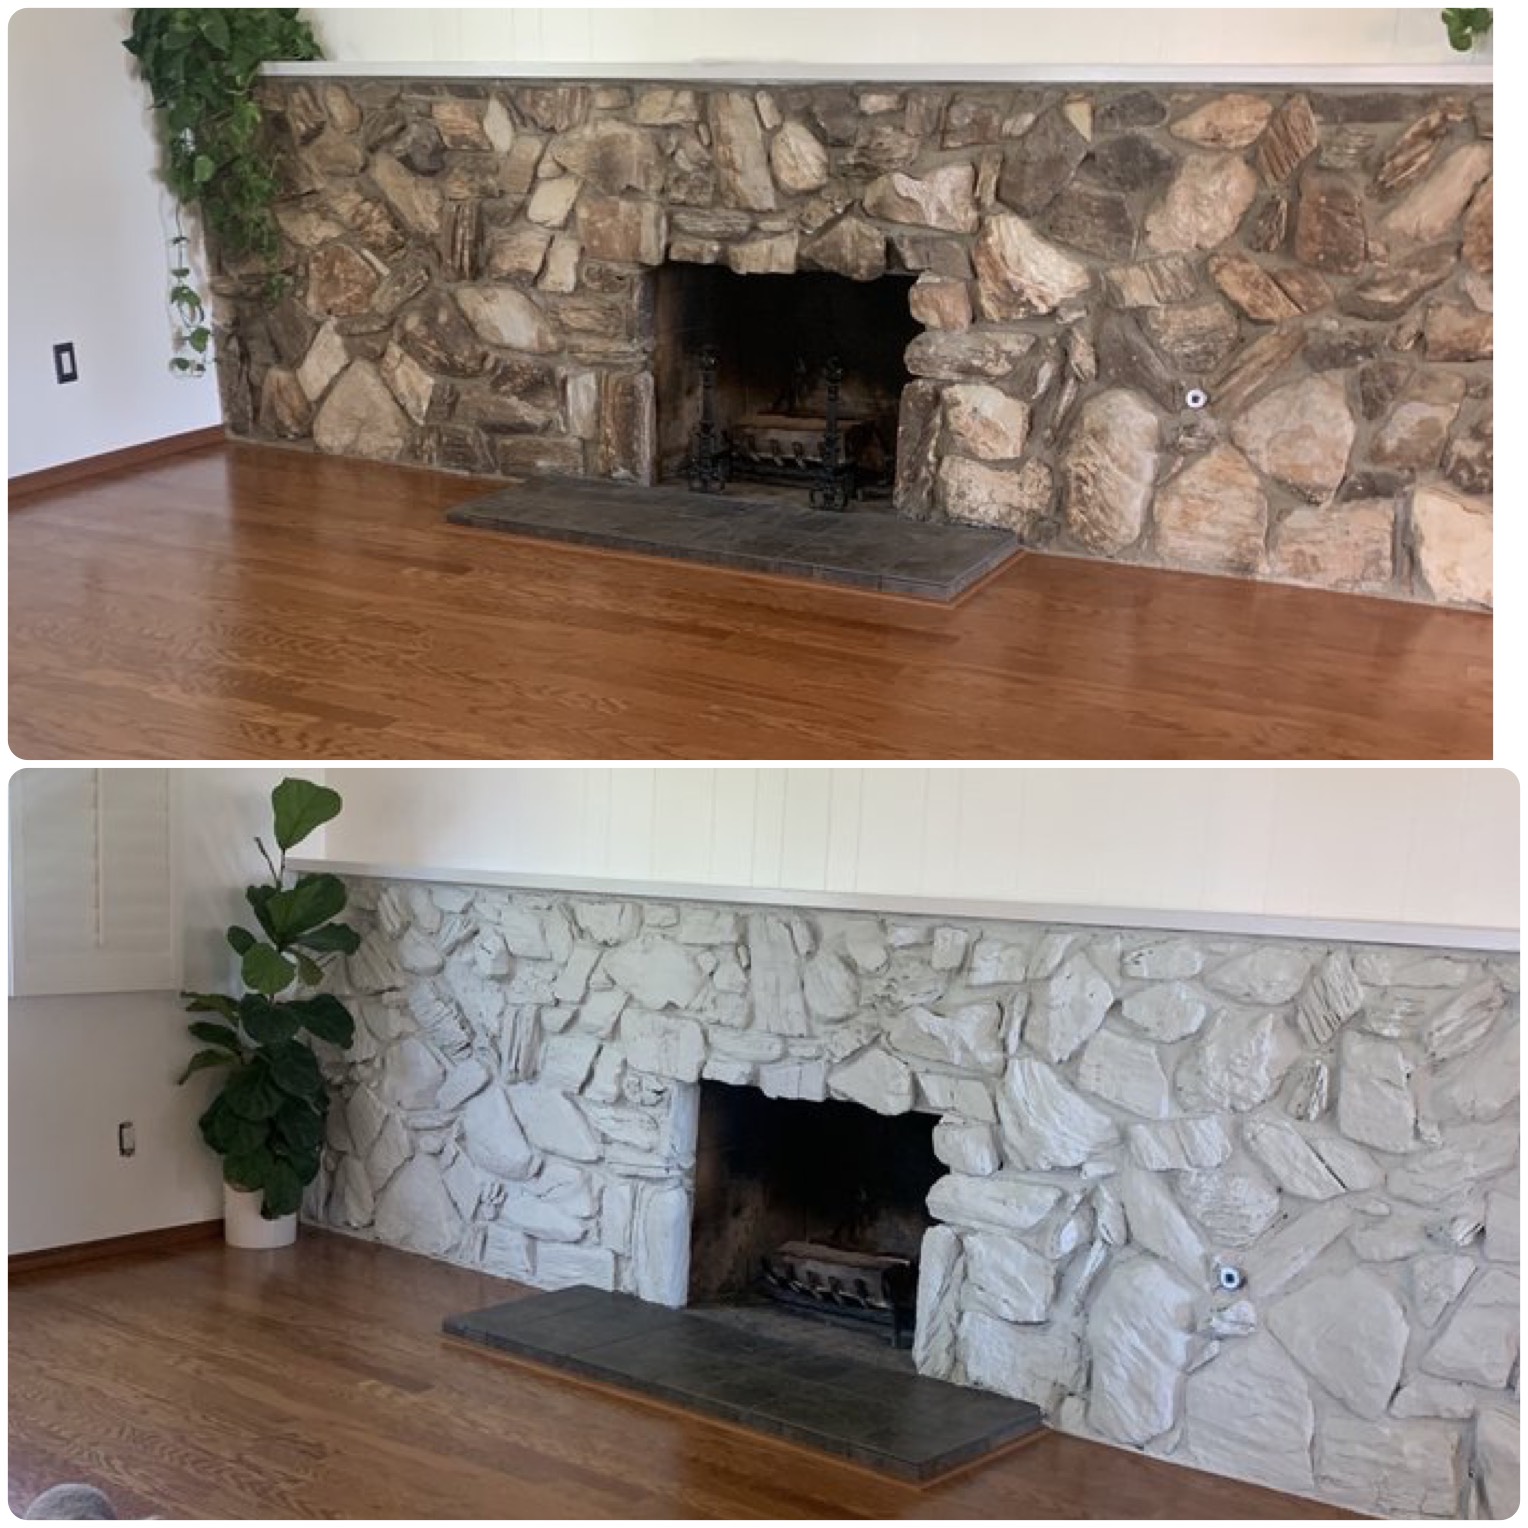 Before and after photos by Victory Paints & Services Inc., showcasing a fireplace area in a Riverside, CA home, with the wall freshly painted in the after photo.